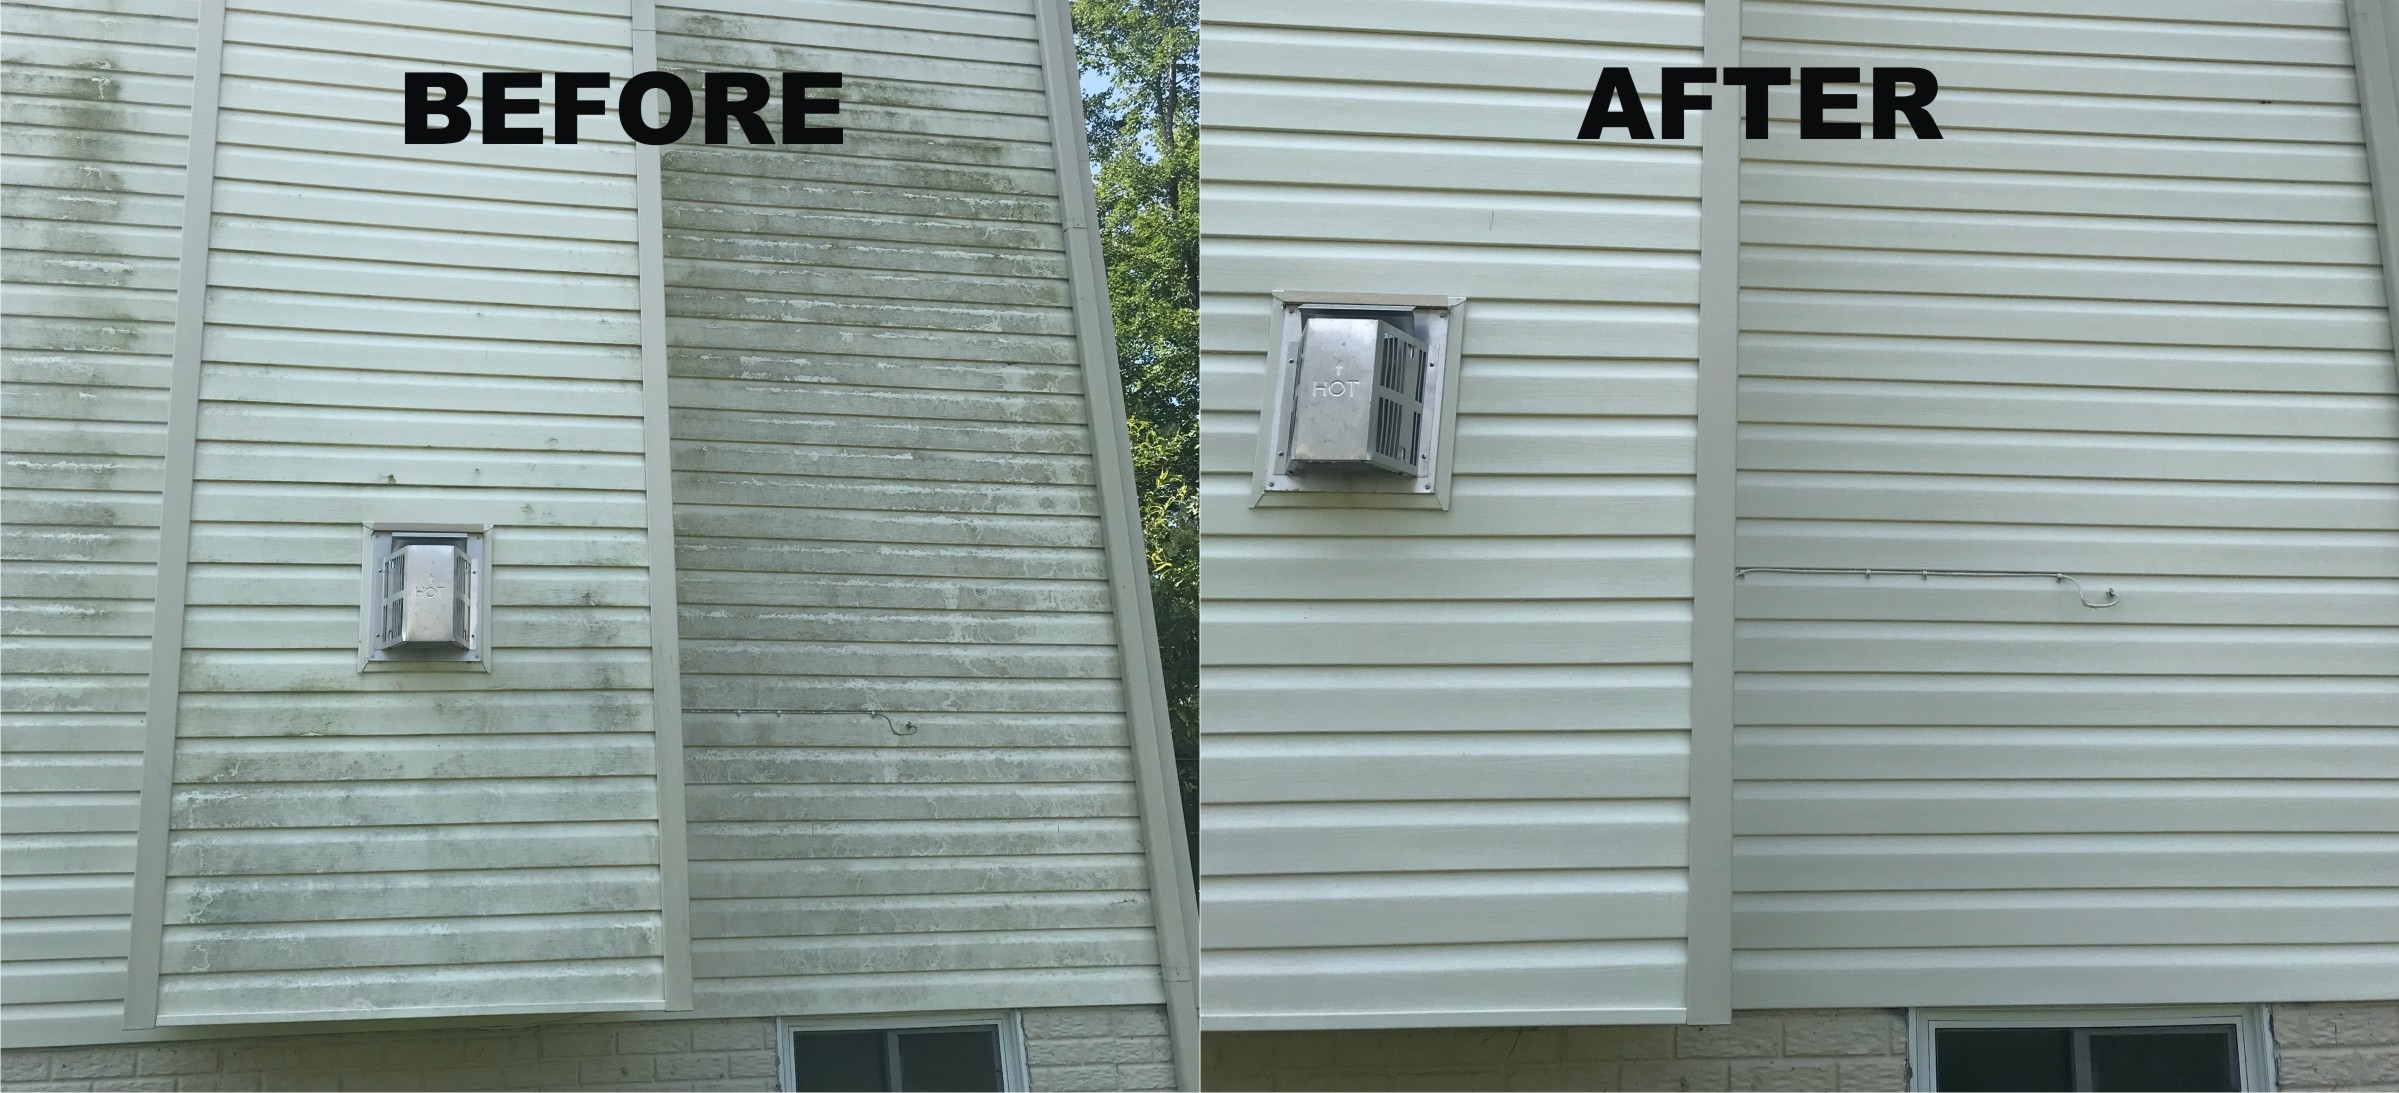 Renewed and Sparkling Home in Columbia, TN after Pressure Washing the exterior, removing all of the Mold, Mildew and Green algae build up! Thumbnail